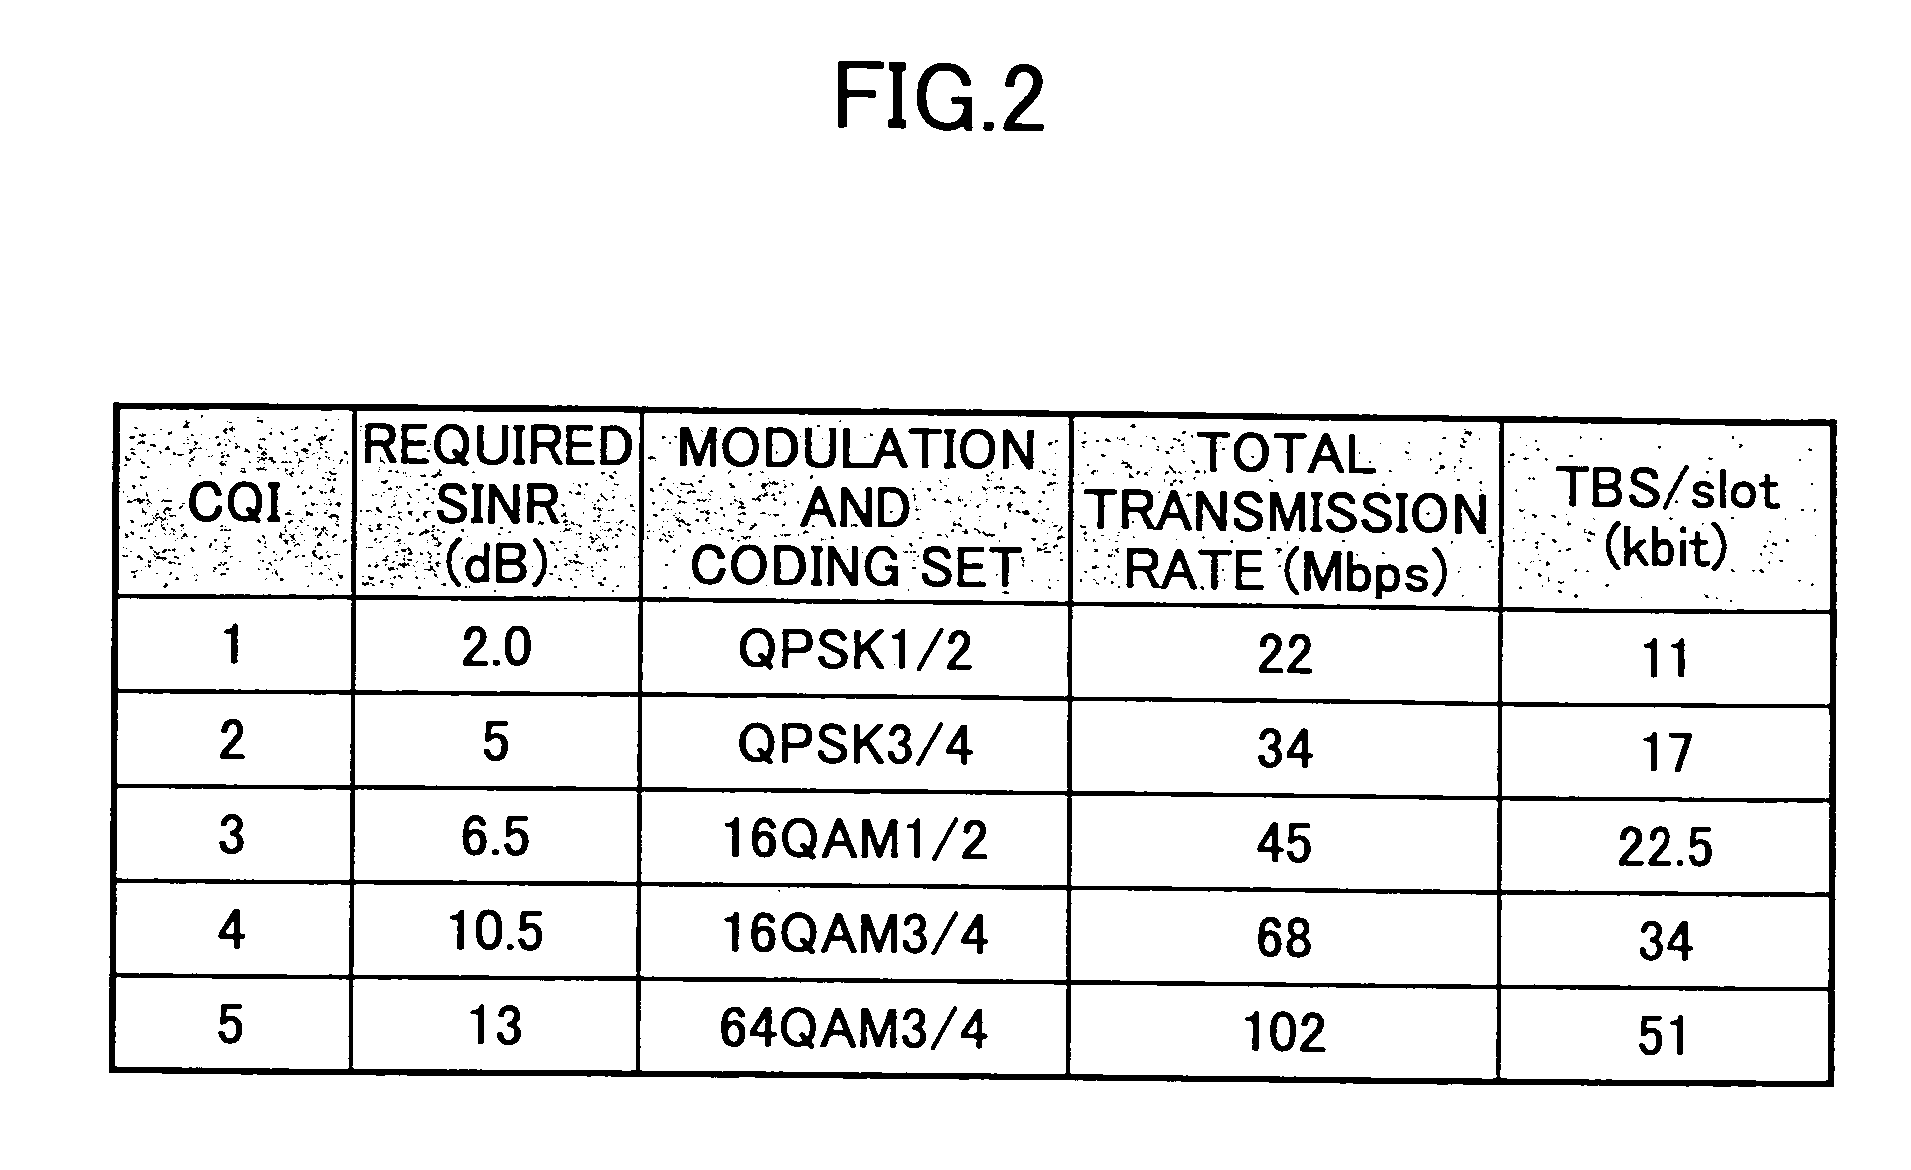 Packet communications taking into account channel quality and buffered data amount